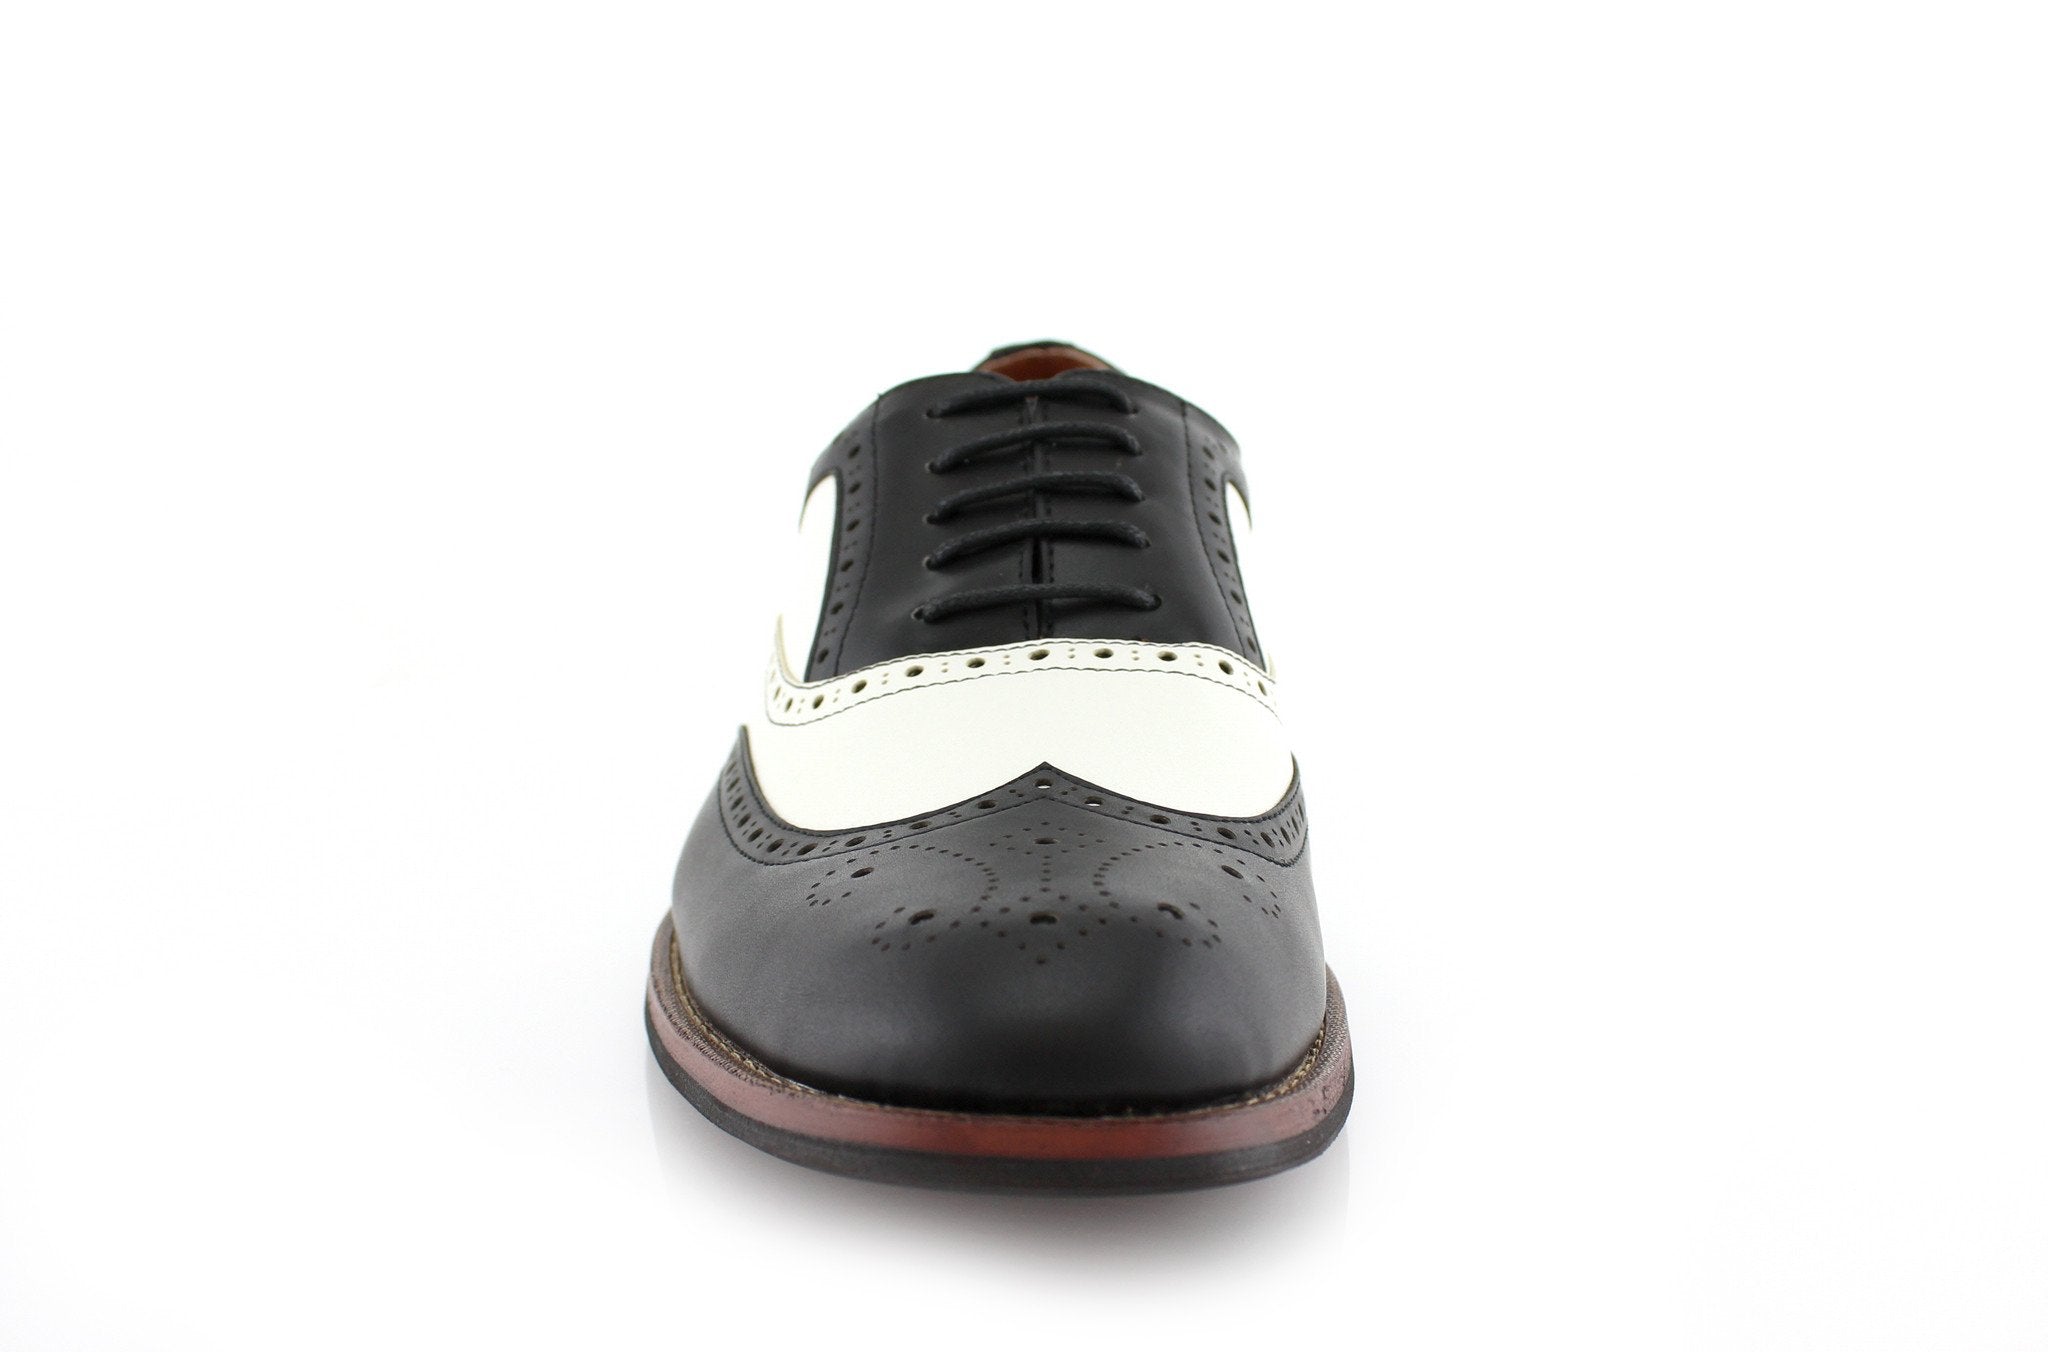 Two-Toned Brogue Wingtip Oxfords | Arthur by Ferro Aldo | Conal Footwear | Front Angle View